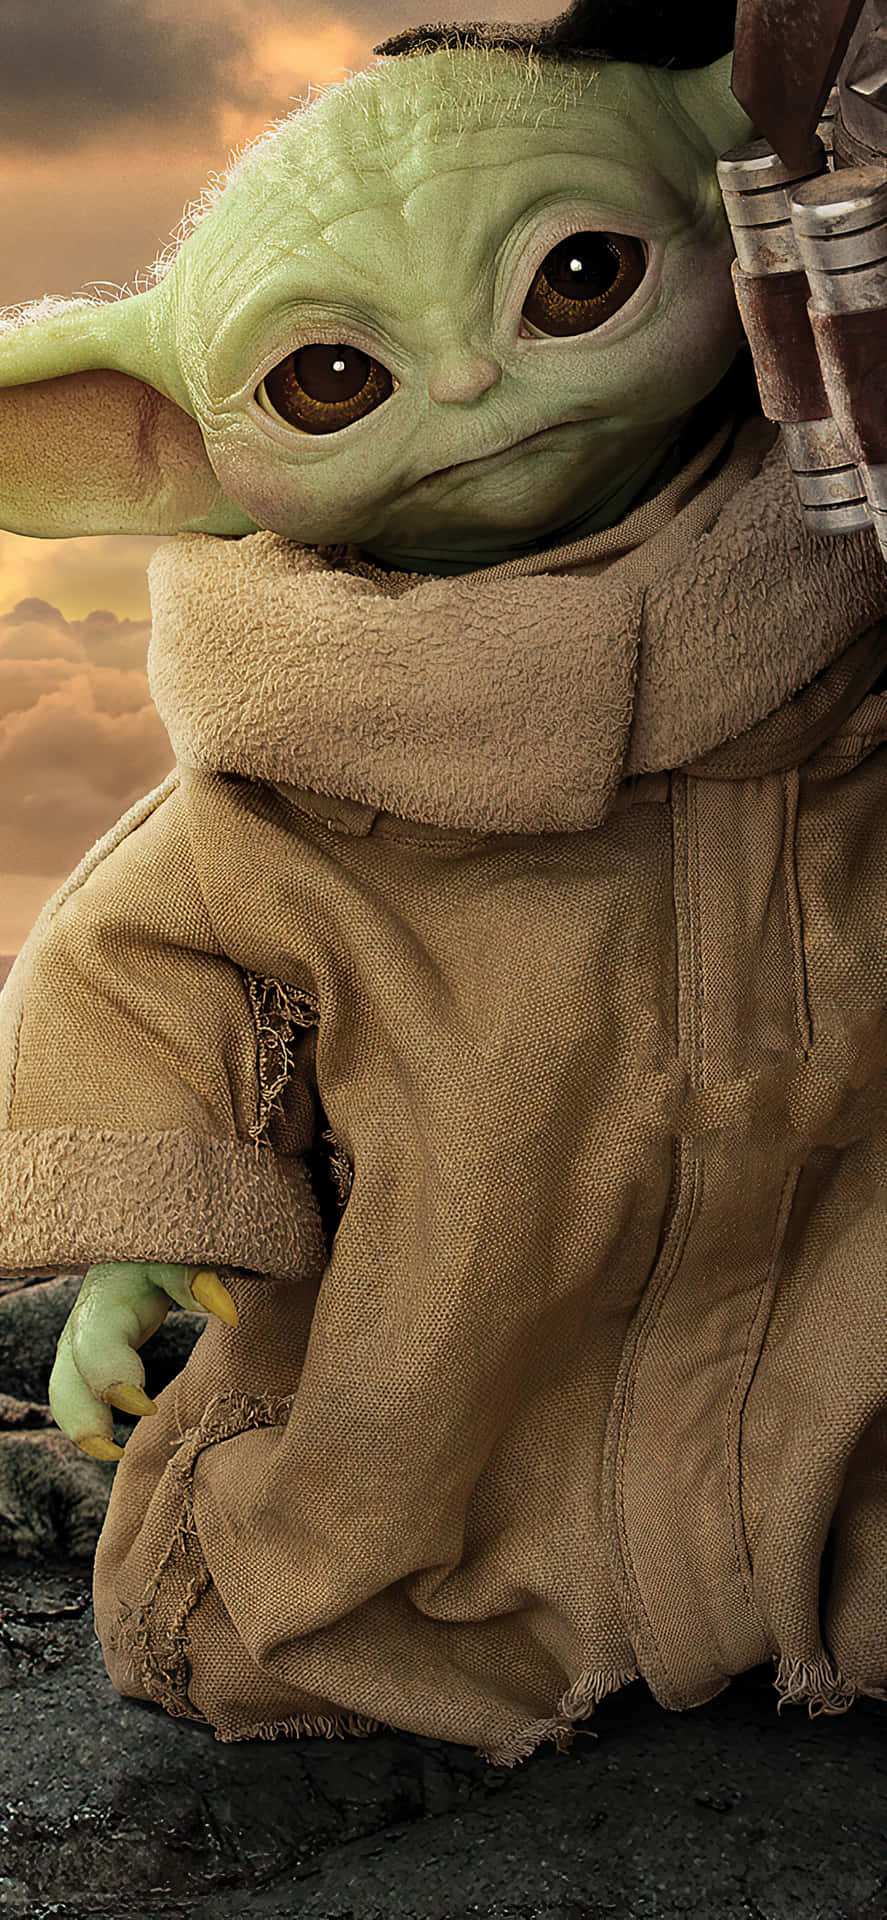 Say hello to the newest addition to your phone - Baby Yoda! Wallpaper